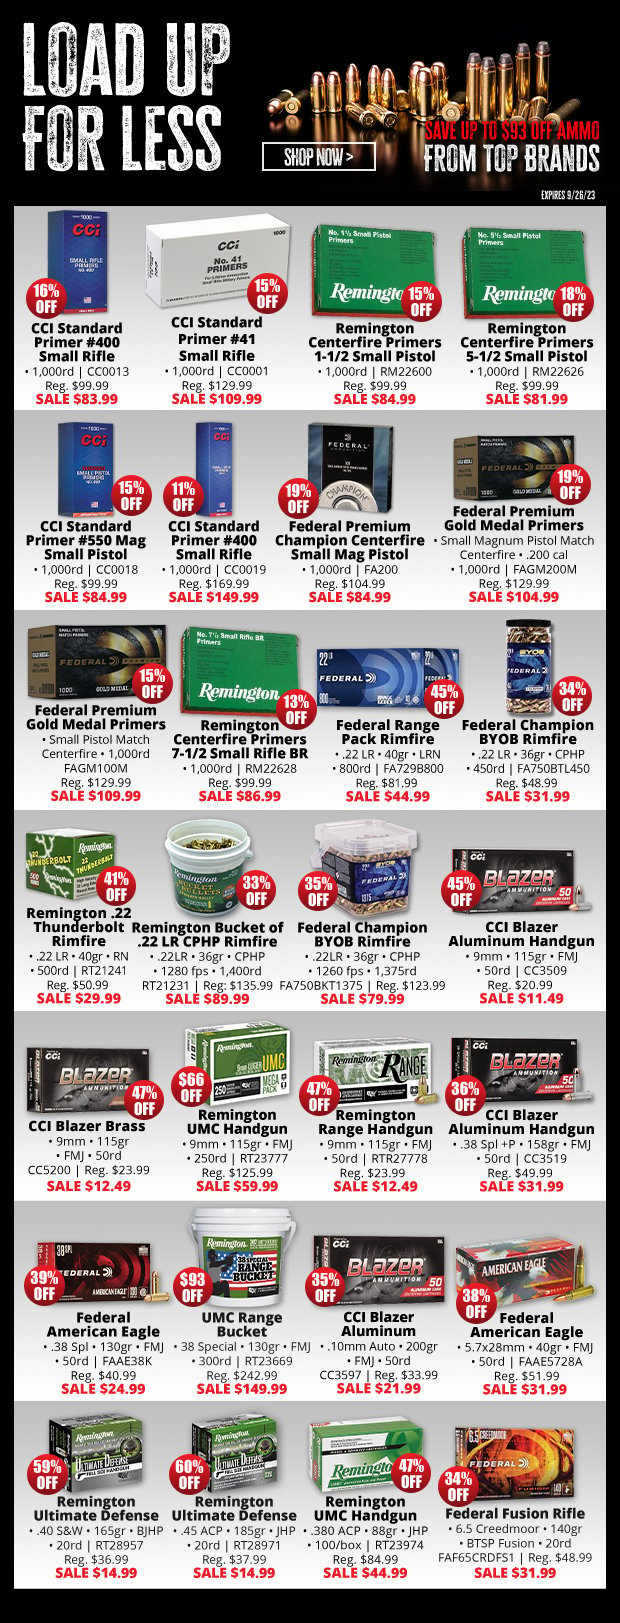 Up to $93 Off Ammo from Top Brands